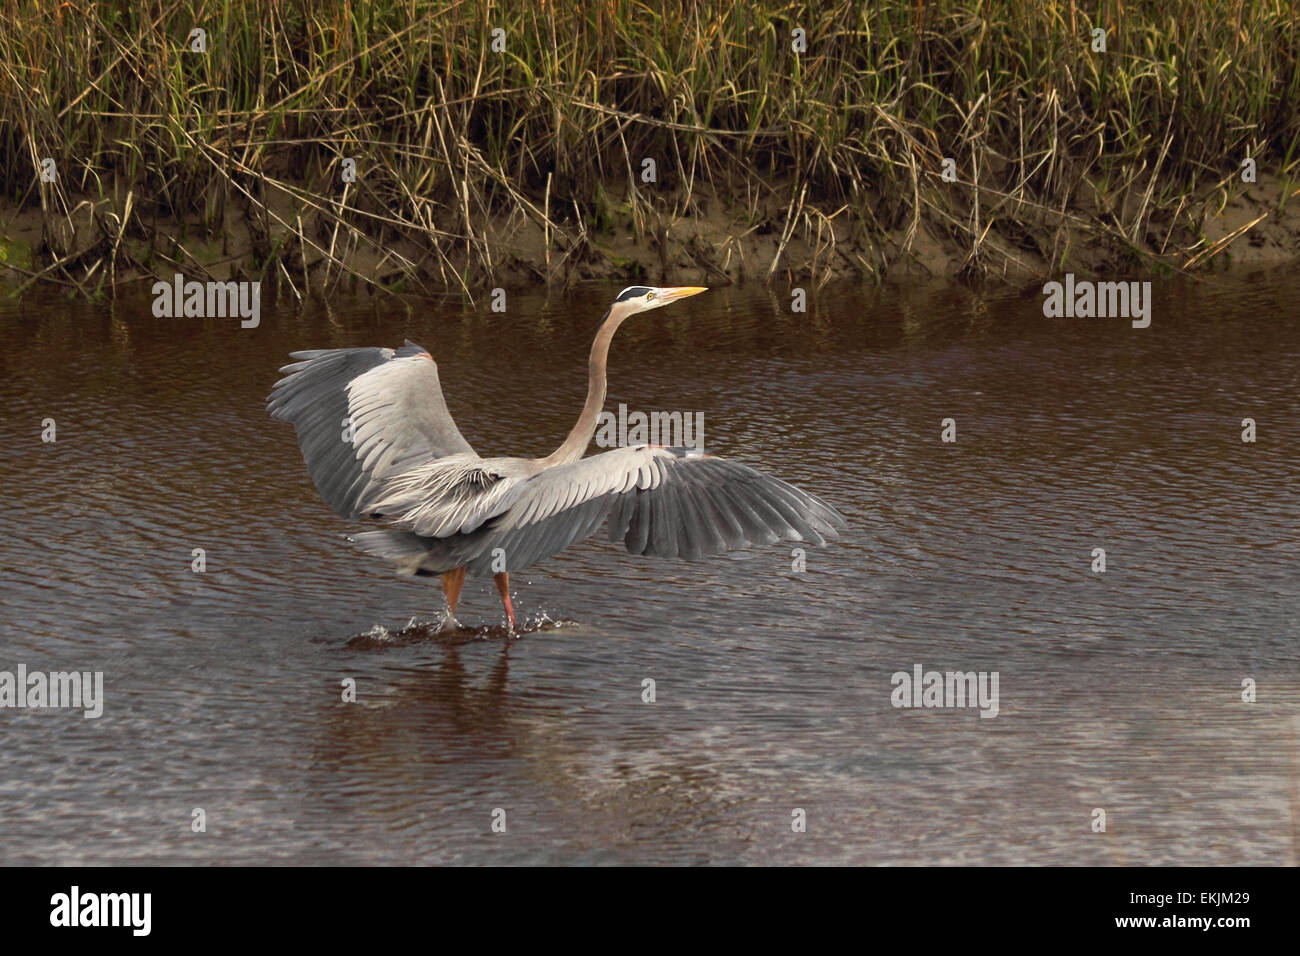 A Great blue heron comes in for a landing in a coastal salt marsh. Stock Photo